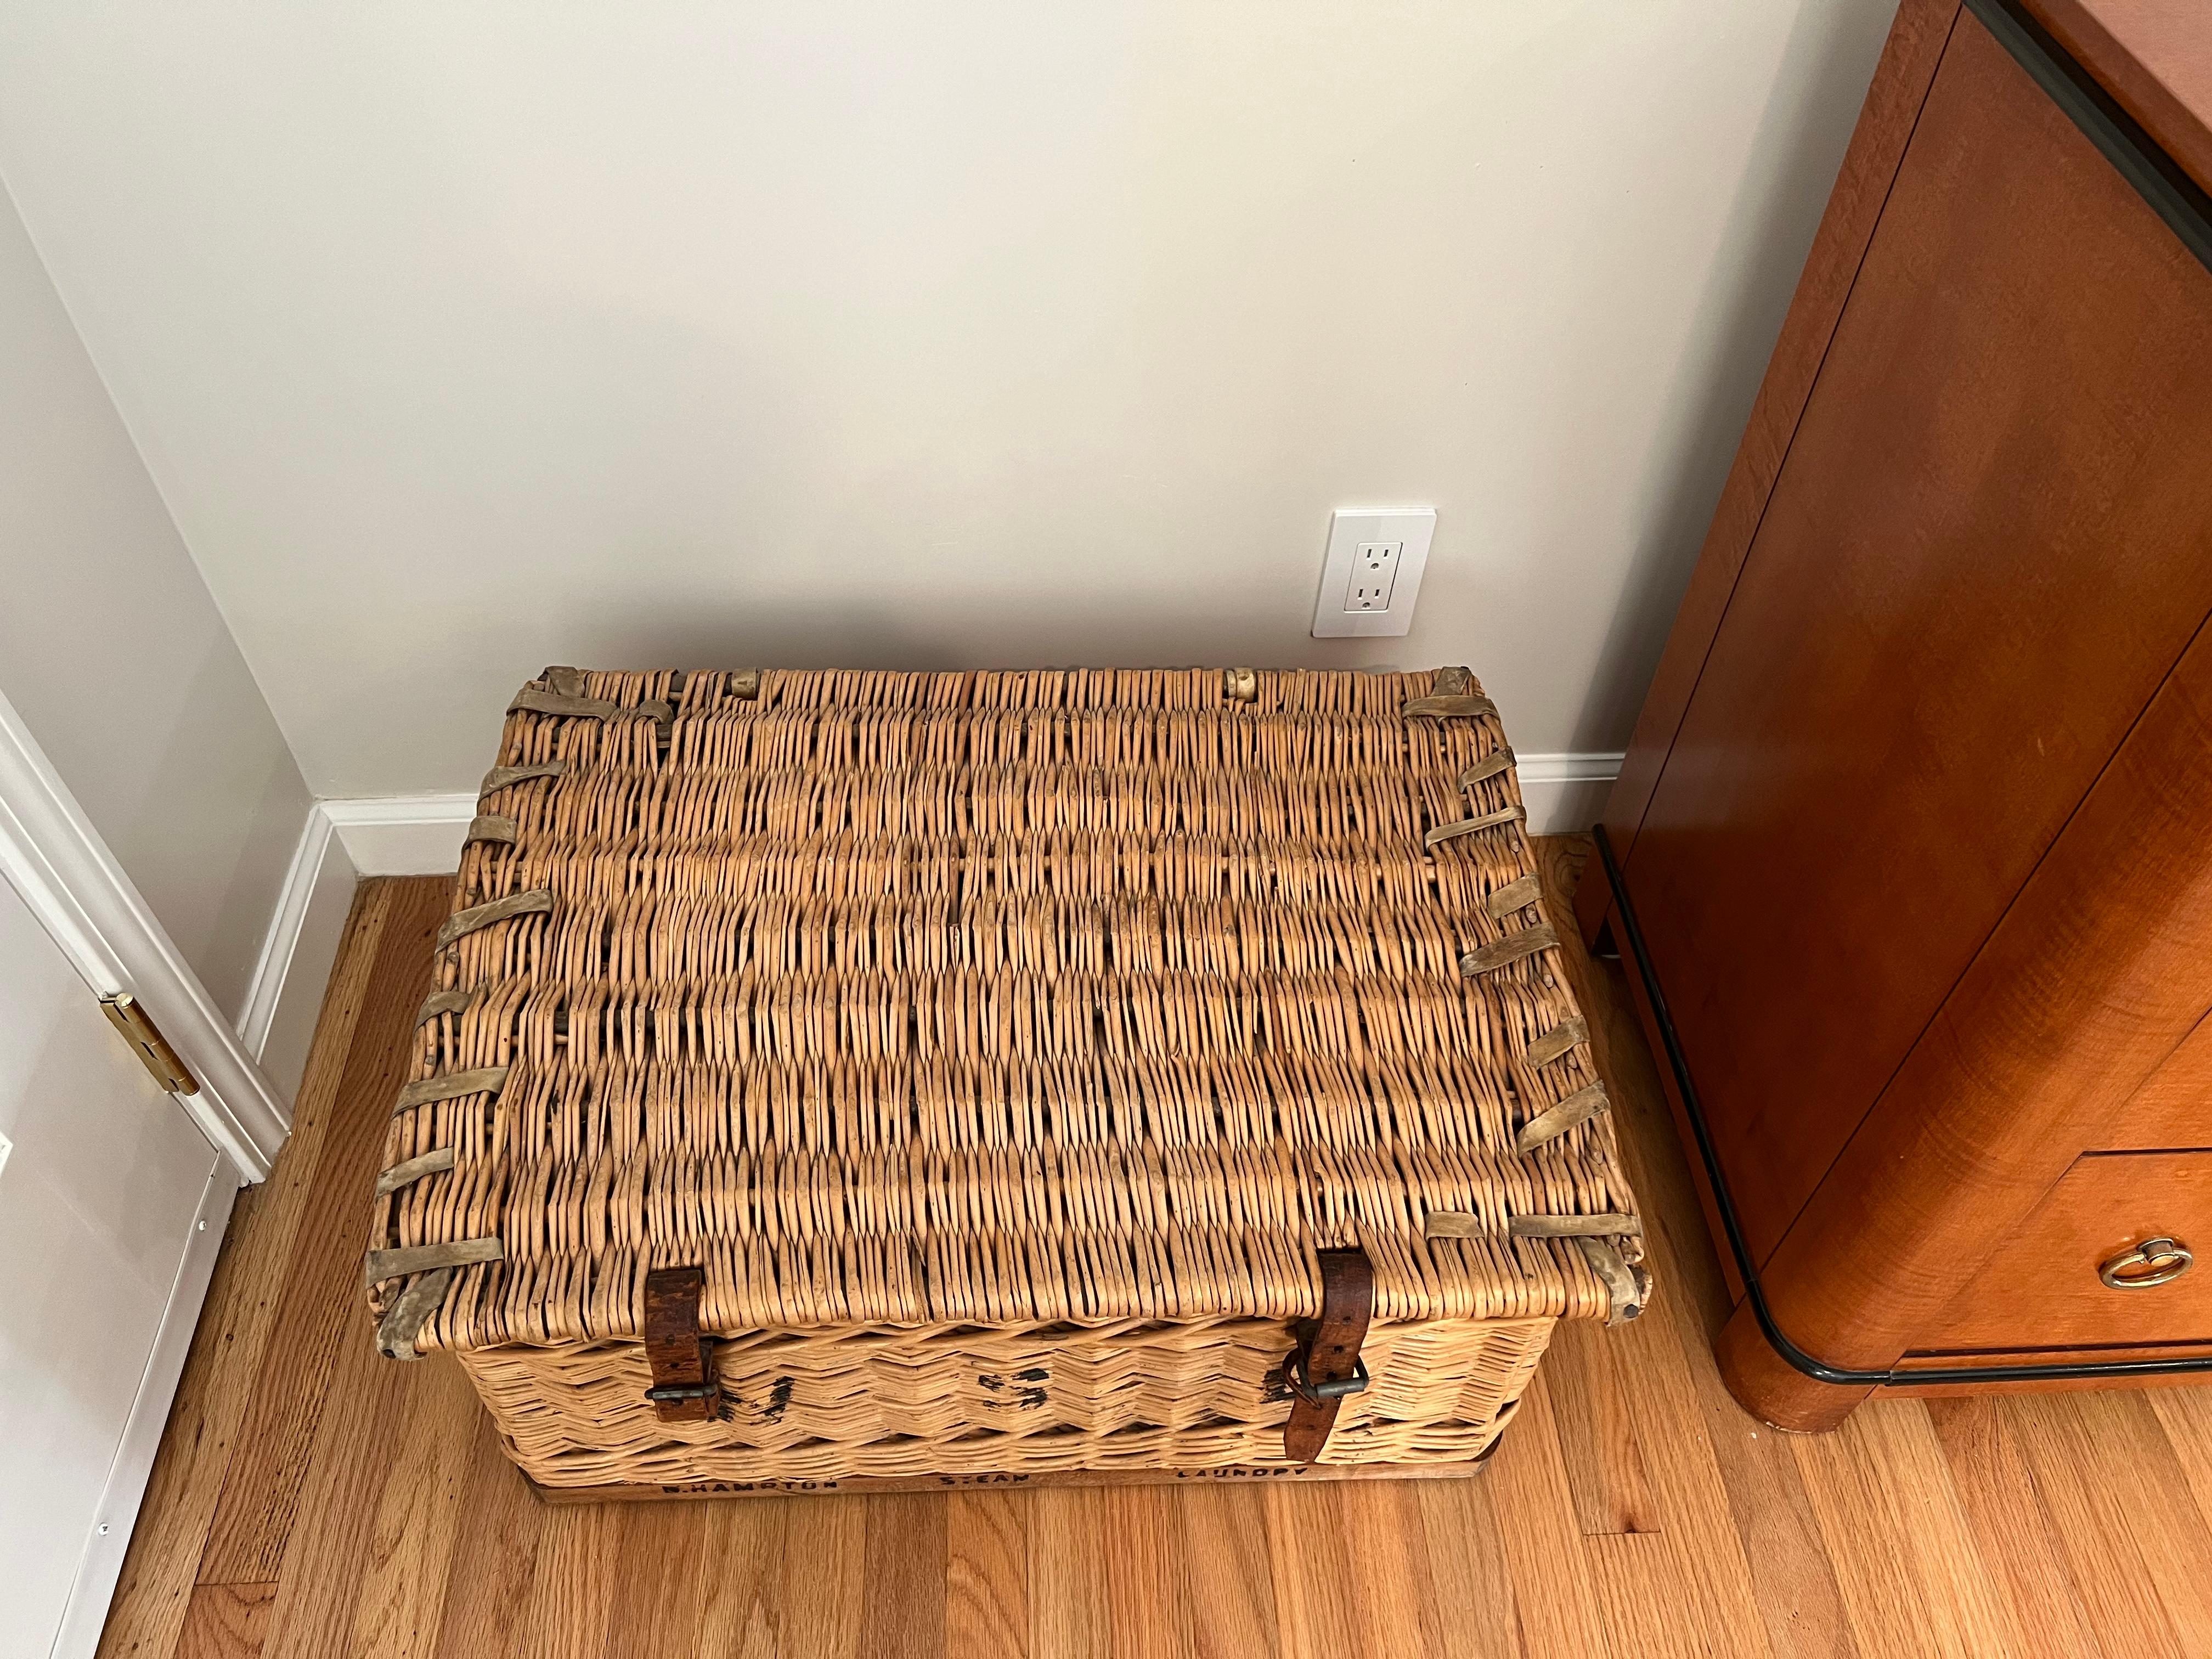 Great looking functional vintage wicker laundry trunk basket, formerly used as a handsome coffee table with storage inside. Cool black graphic numbers and lettering on the trunk adds to the authentic look.